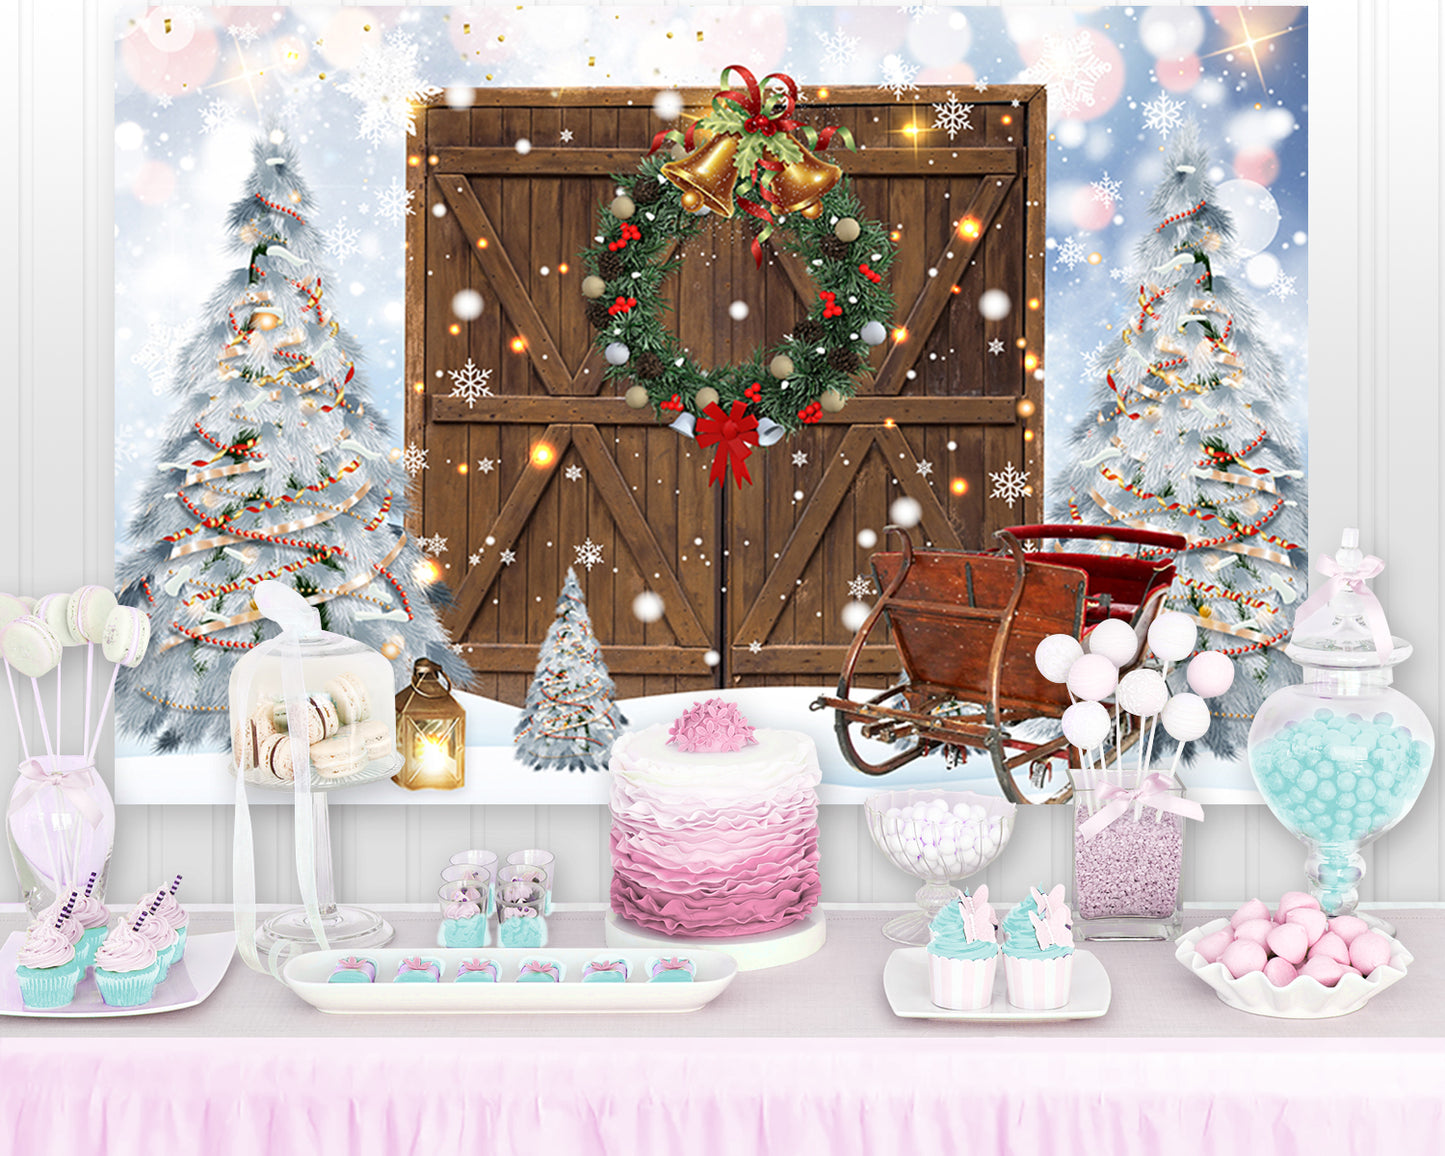 Rustic Christmas Barn Wood Door Backdrop for Photography Xmas Tree Snow Gift Wall Floor Party Photo Background Family Holiday Supplies Banner Decorations Studio Prop Pictures